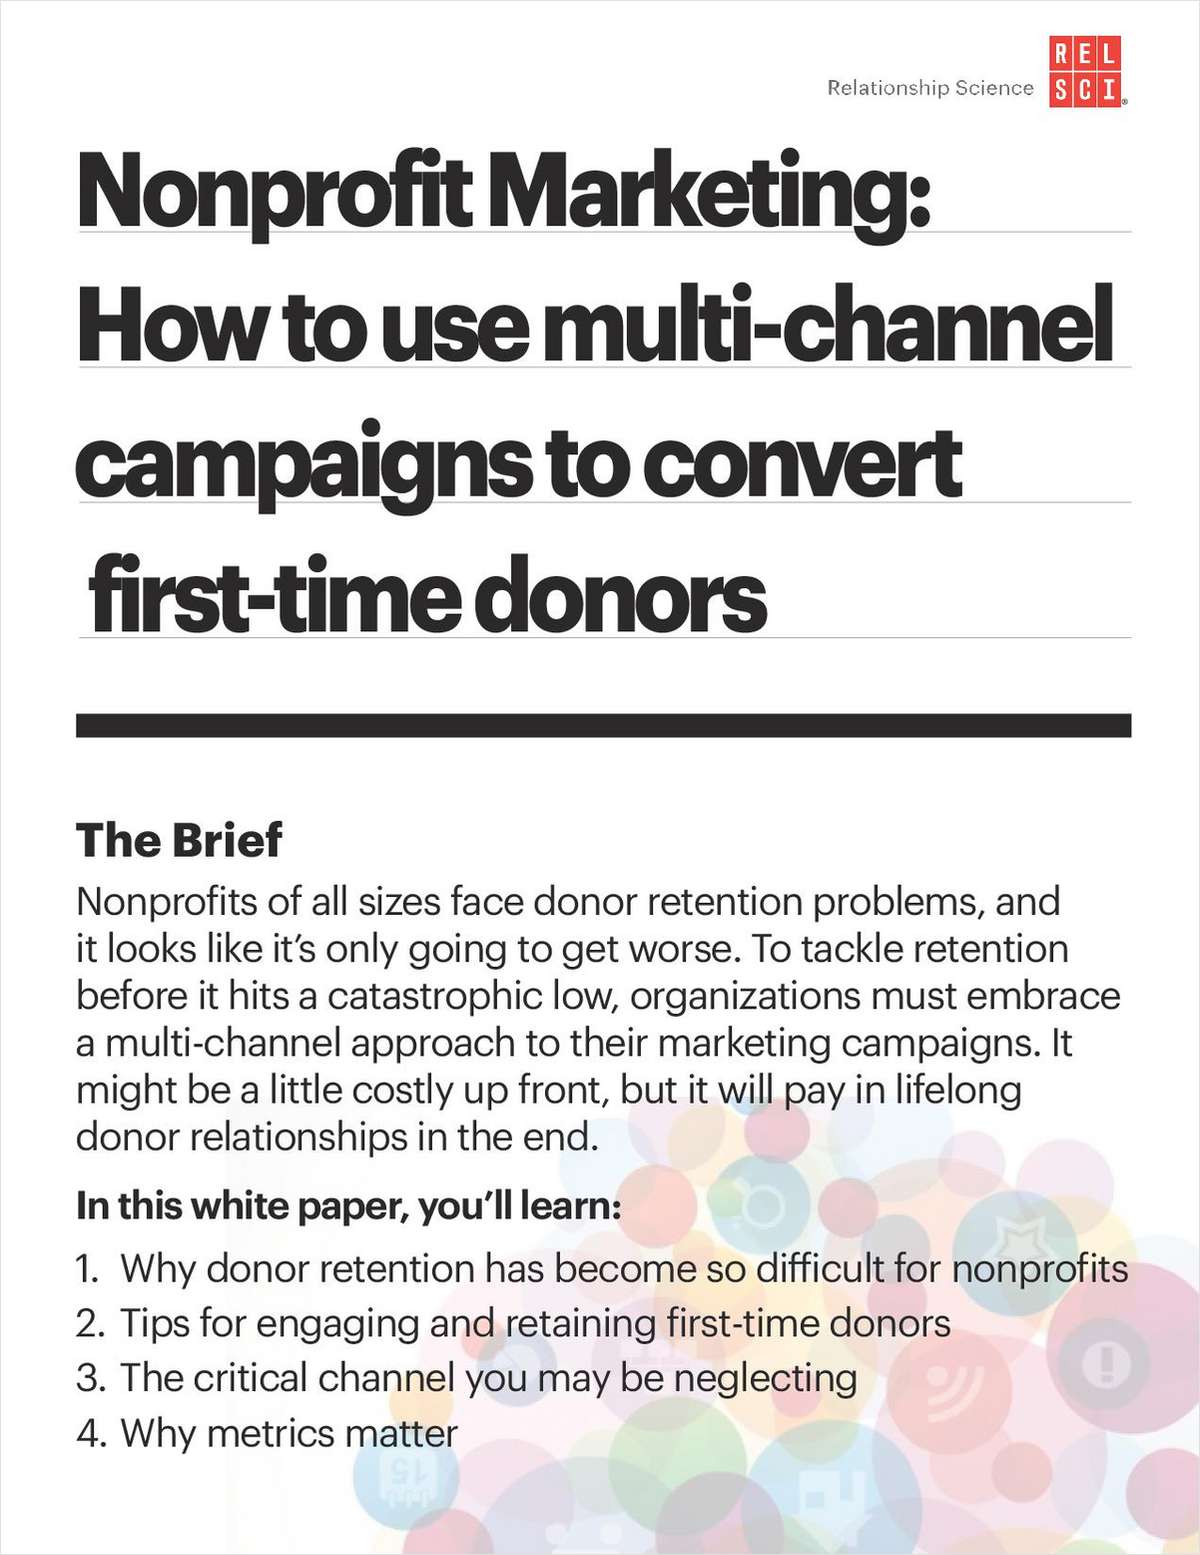 Nonprofit Marketing: How Fundraisers Can Use Multi-Channel Campaigns to Convert First-Time Donors